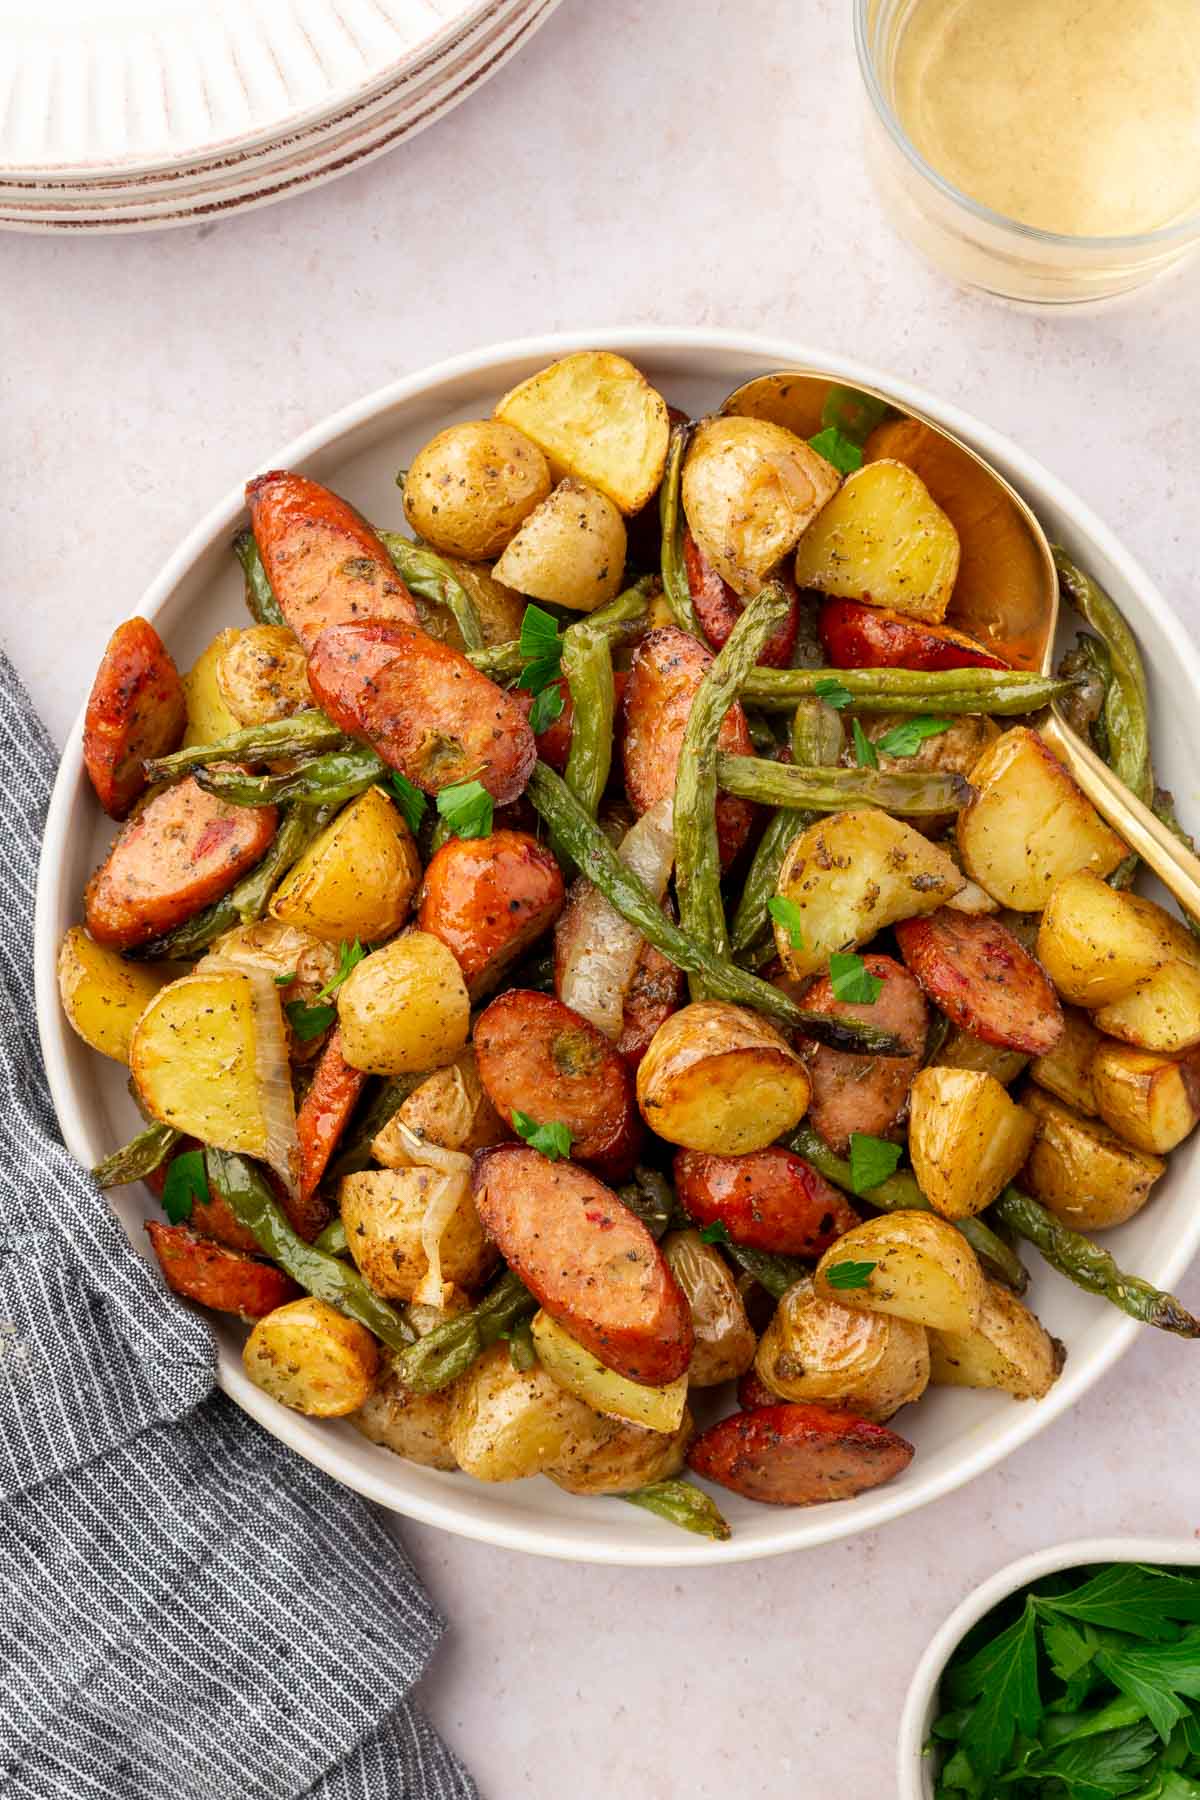 An overhead view of roasted green beans, potatoes, sausage and onions in a bowl with a gold serving spoon.